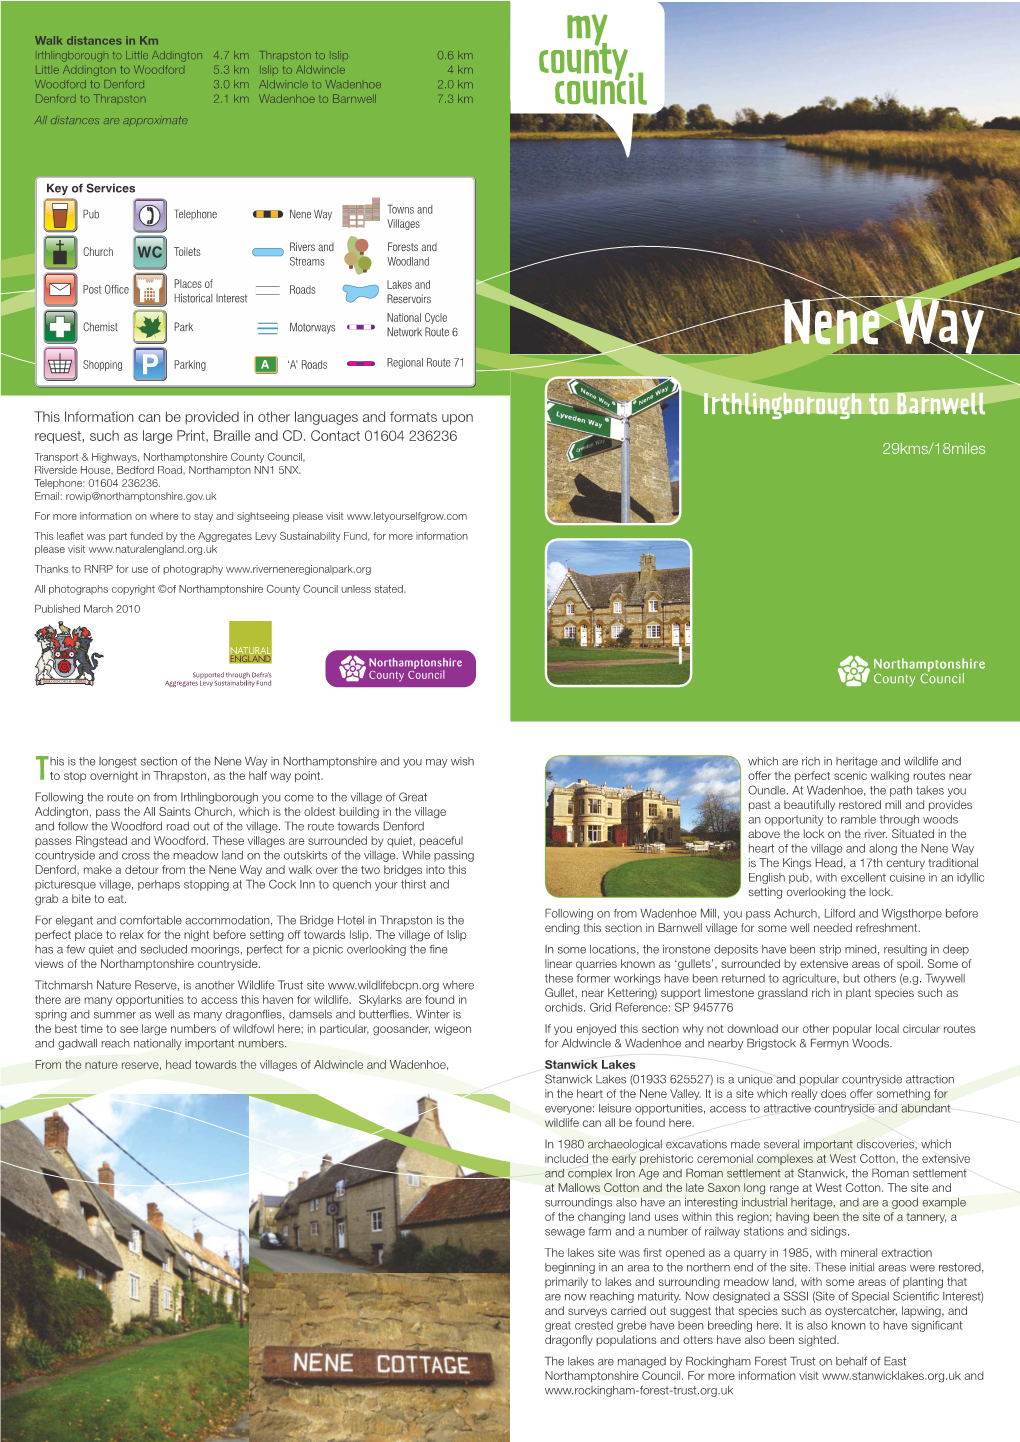 Nene Way Towns and Villages